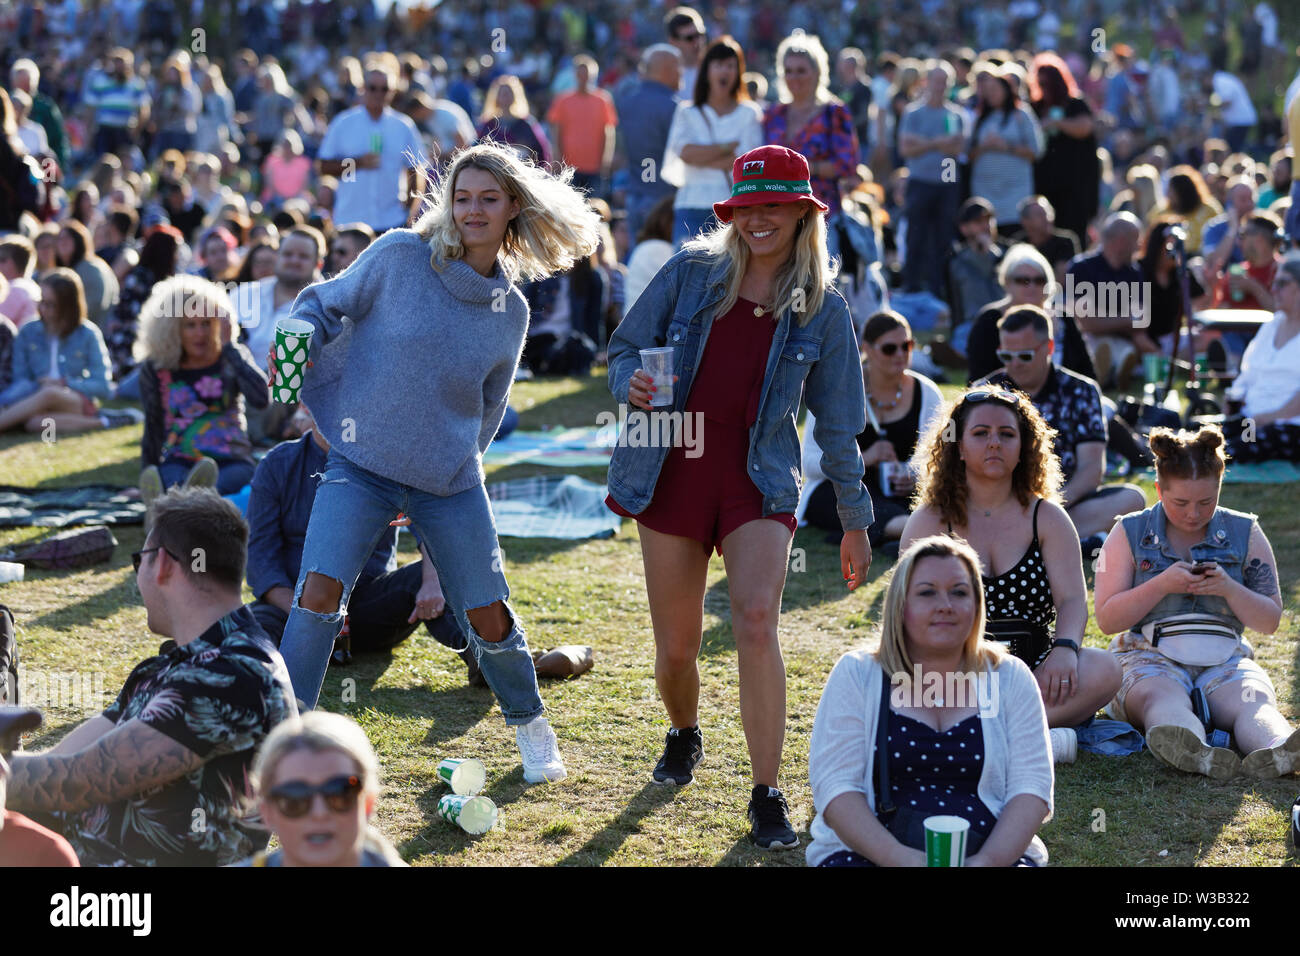 Swansea, UK. 13th July, 2019. Music fans in the crowd. Re: Stereophonics live concert at the Singleton Park in Swansea, Wales, UK. Credit: ATHENA PICTURE AGENCY LTD/Alamy Live News Stock Photo